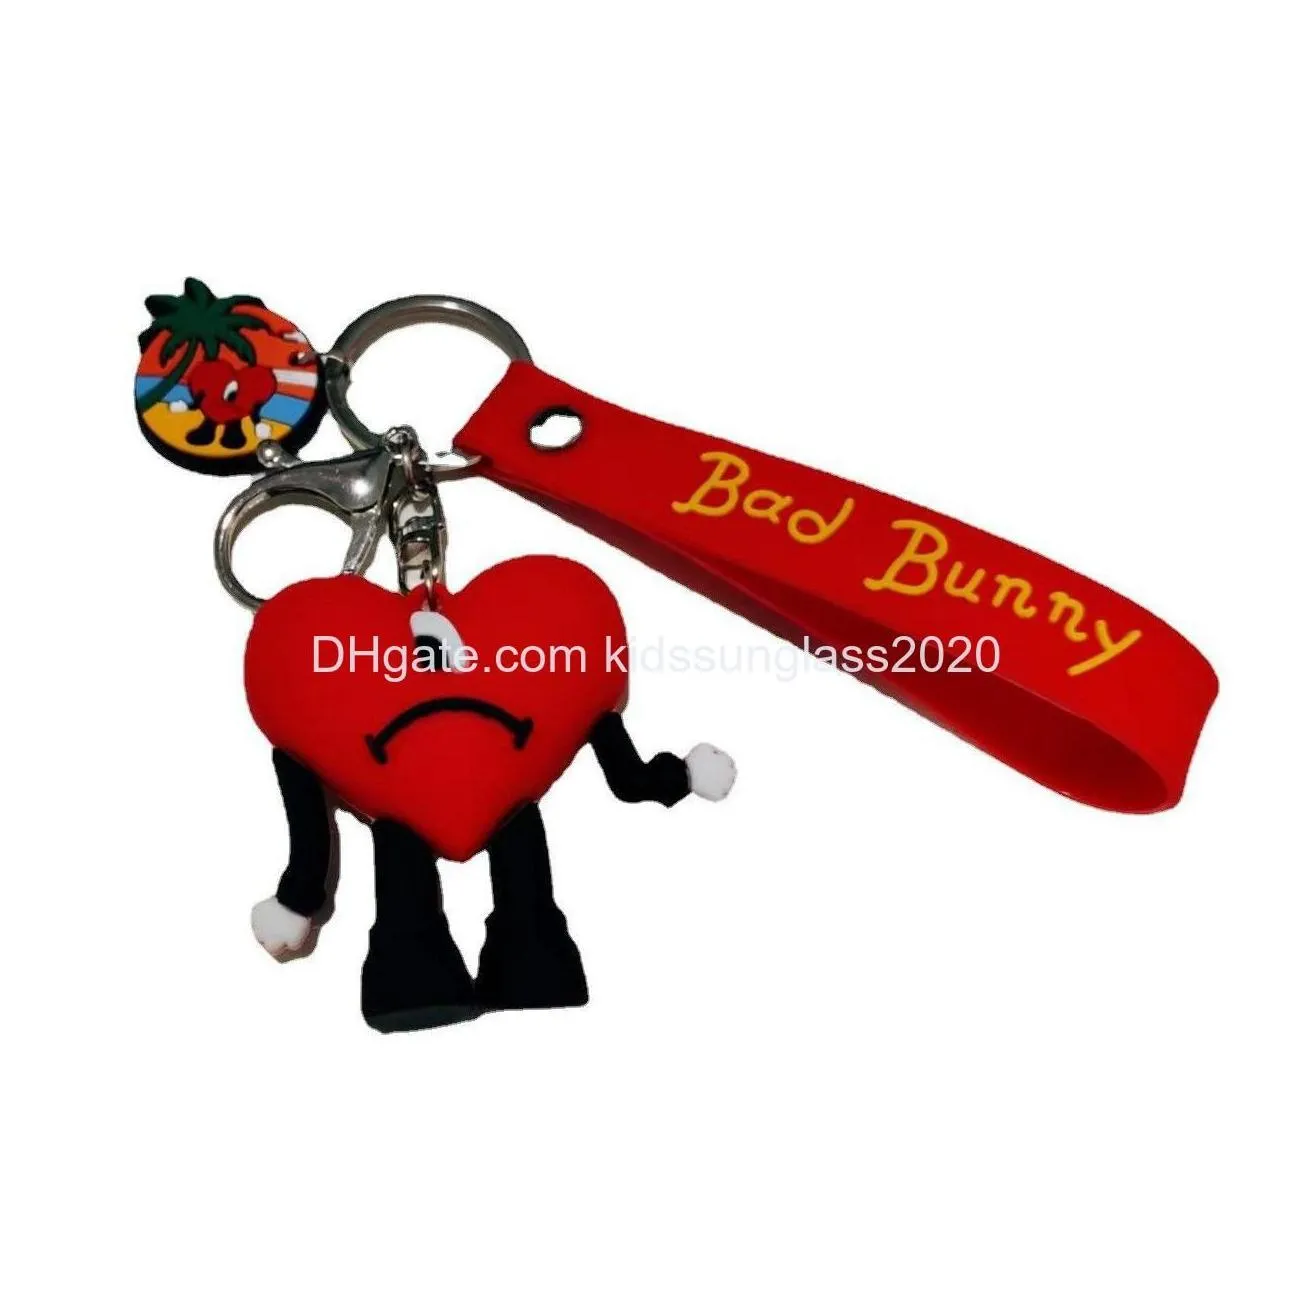 decompression toy bad bunny keychain bag car pendants pvc avocado key chains d21 drop delivery toys gifts novelty gag dhmev